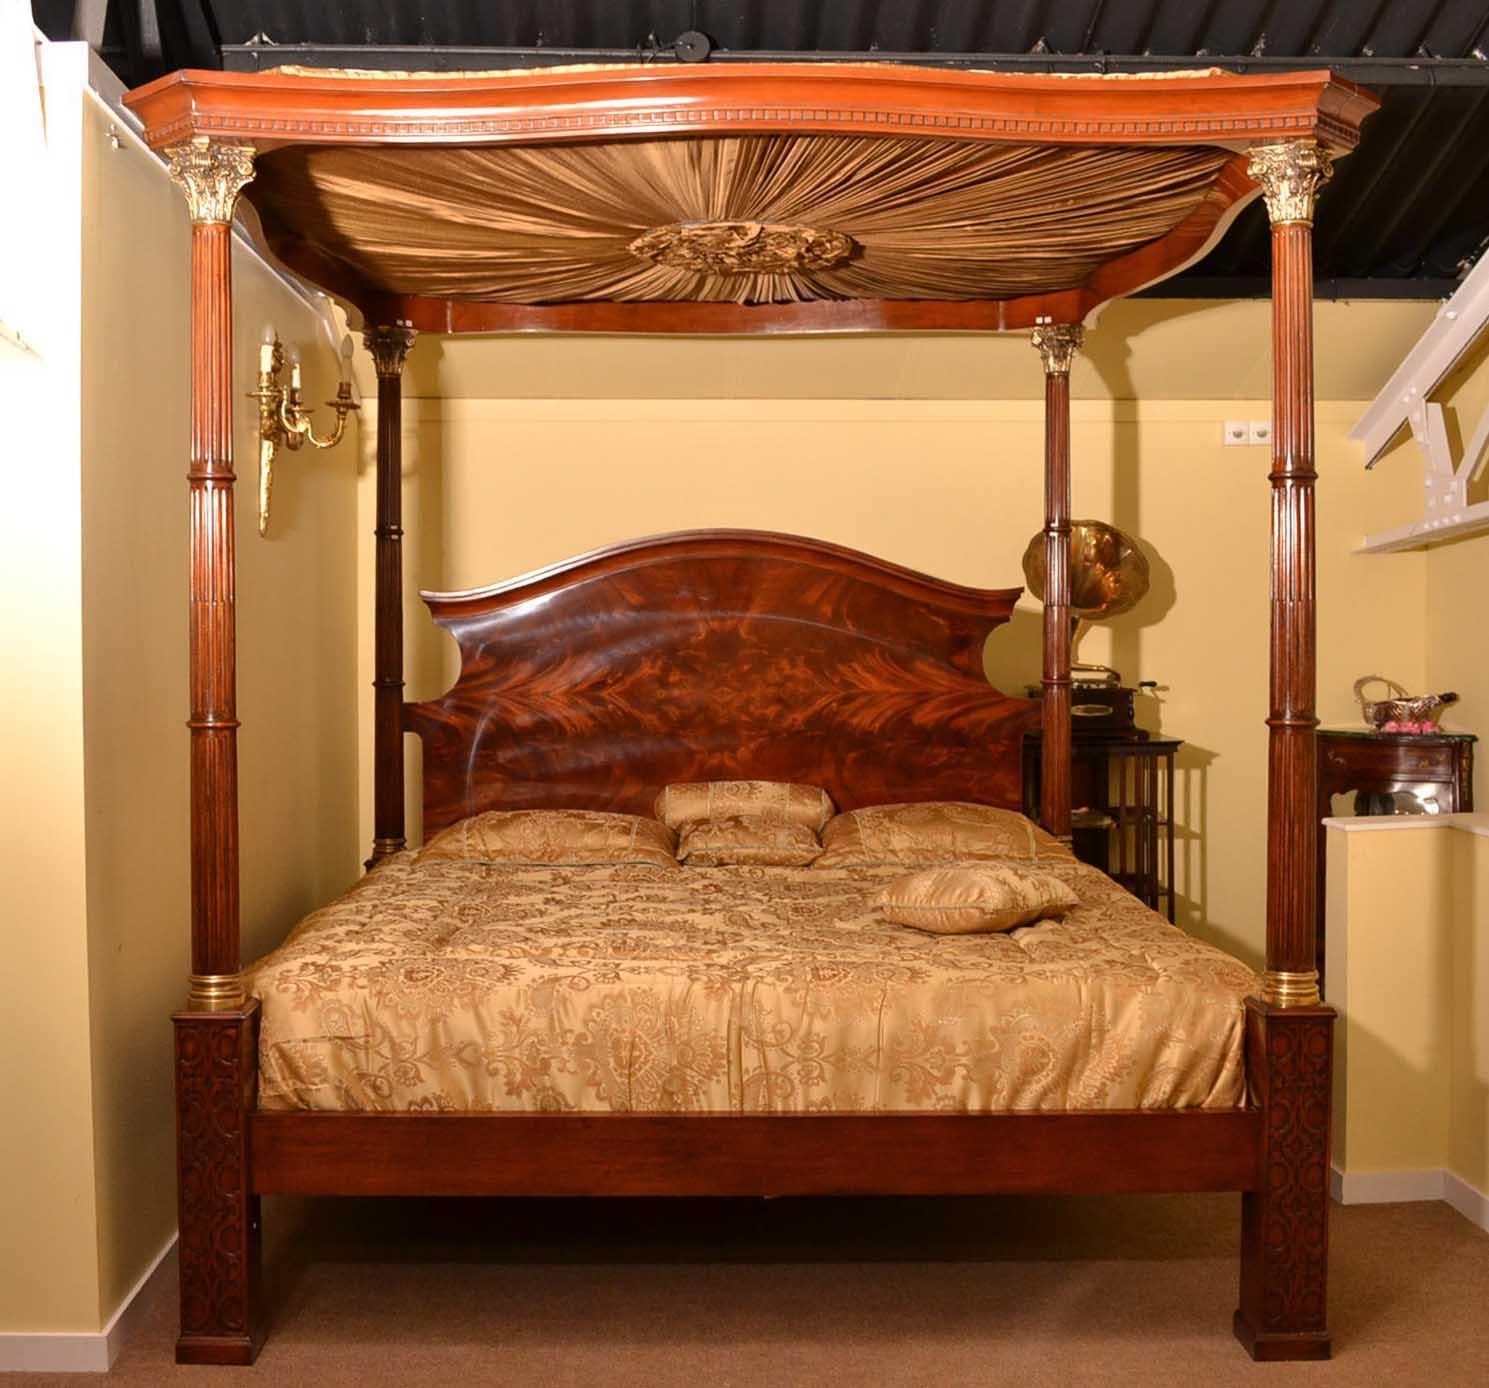 This is an exquisite vintage Four Poster Bed with silk canopy dating from the late 20th Century.

It has a beautiful flame mahogany headboard and four wonderful reeded columns which are surmounted with ormolu Capitelli.

A lot of intricate